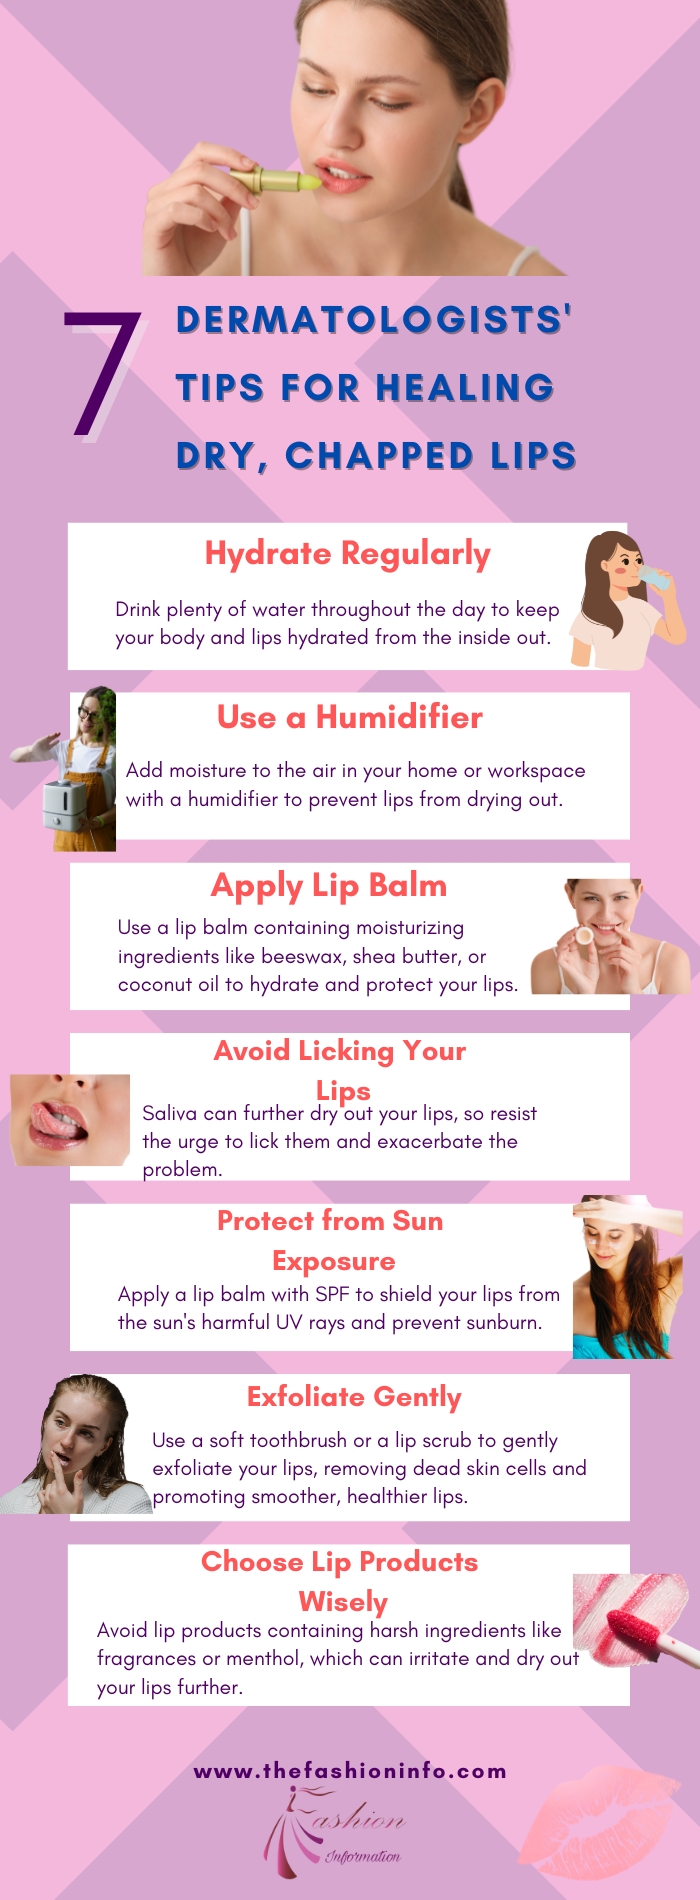 7 Dermatologists' Tips for Healing Dry, Chapped Lips